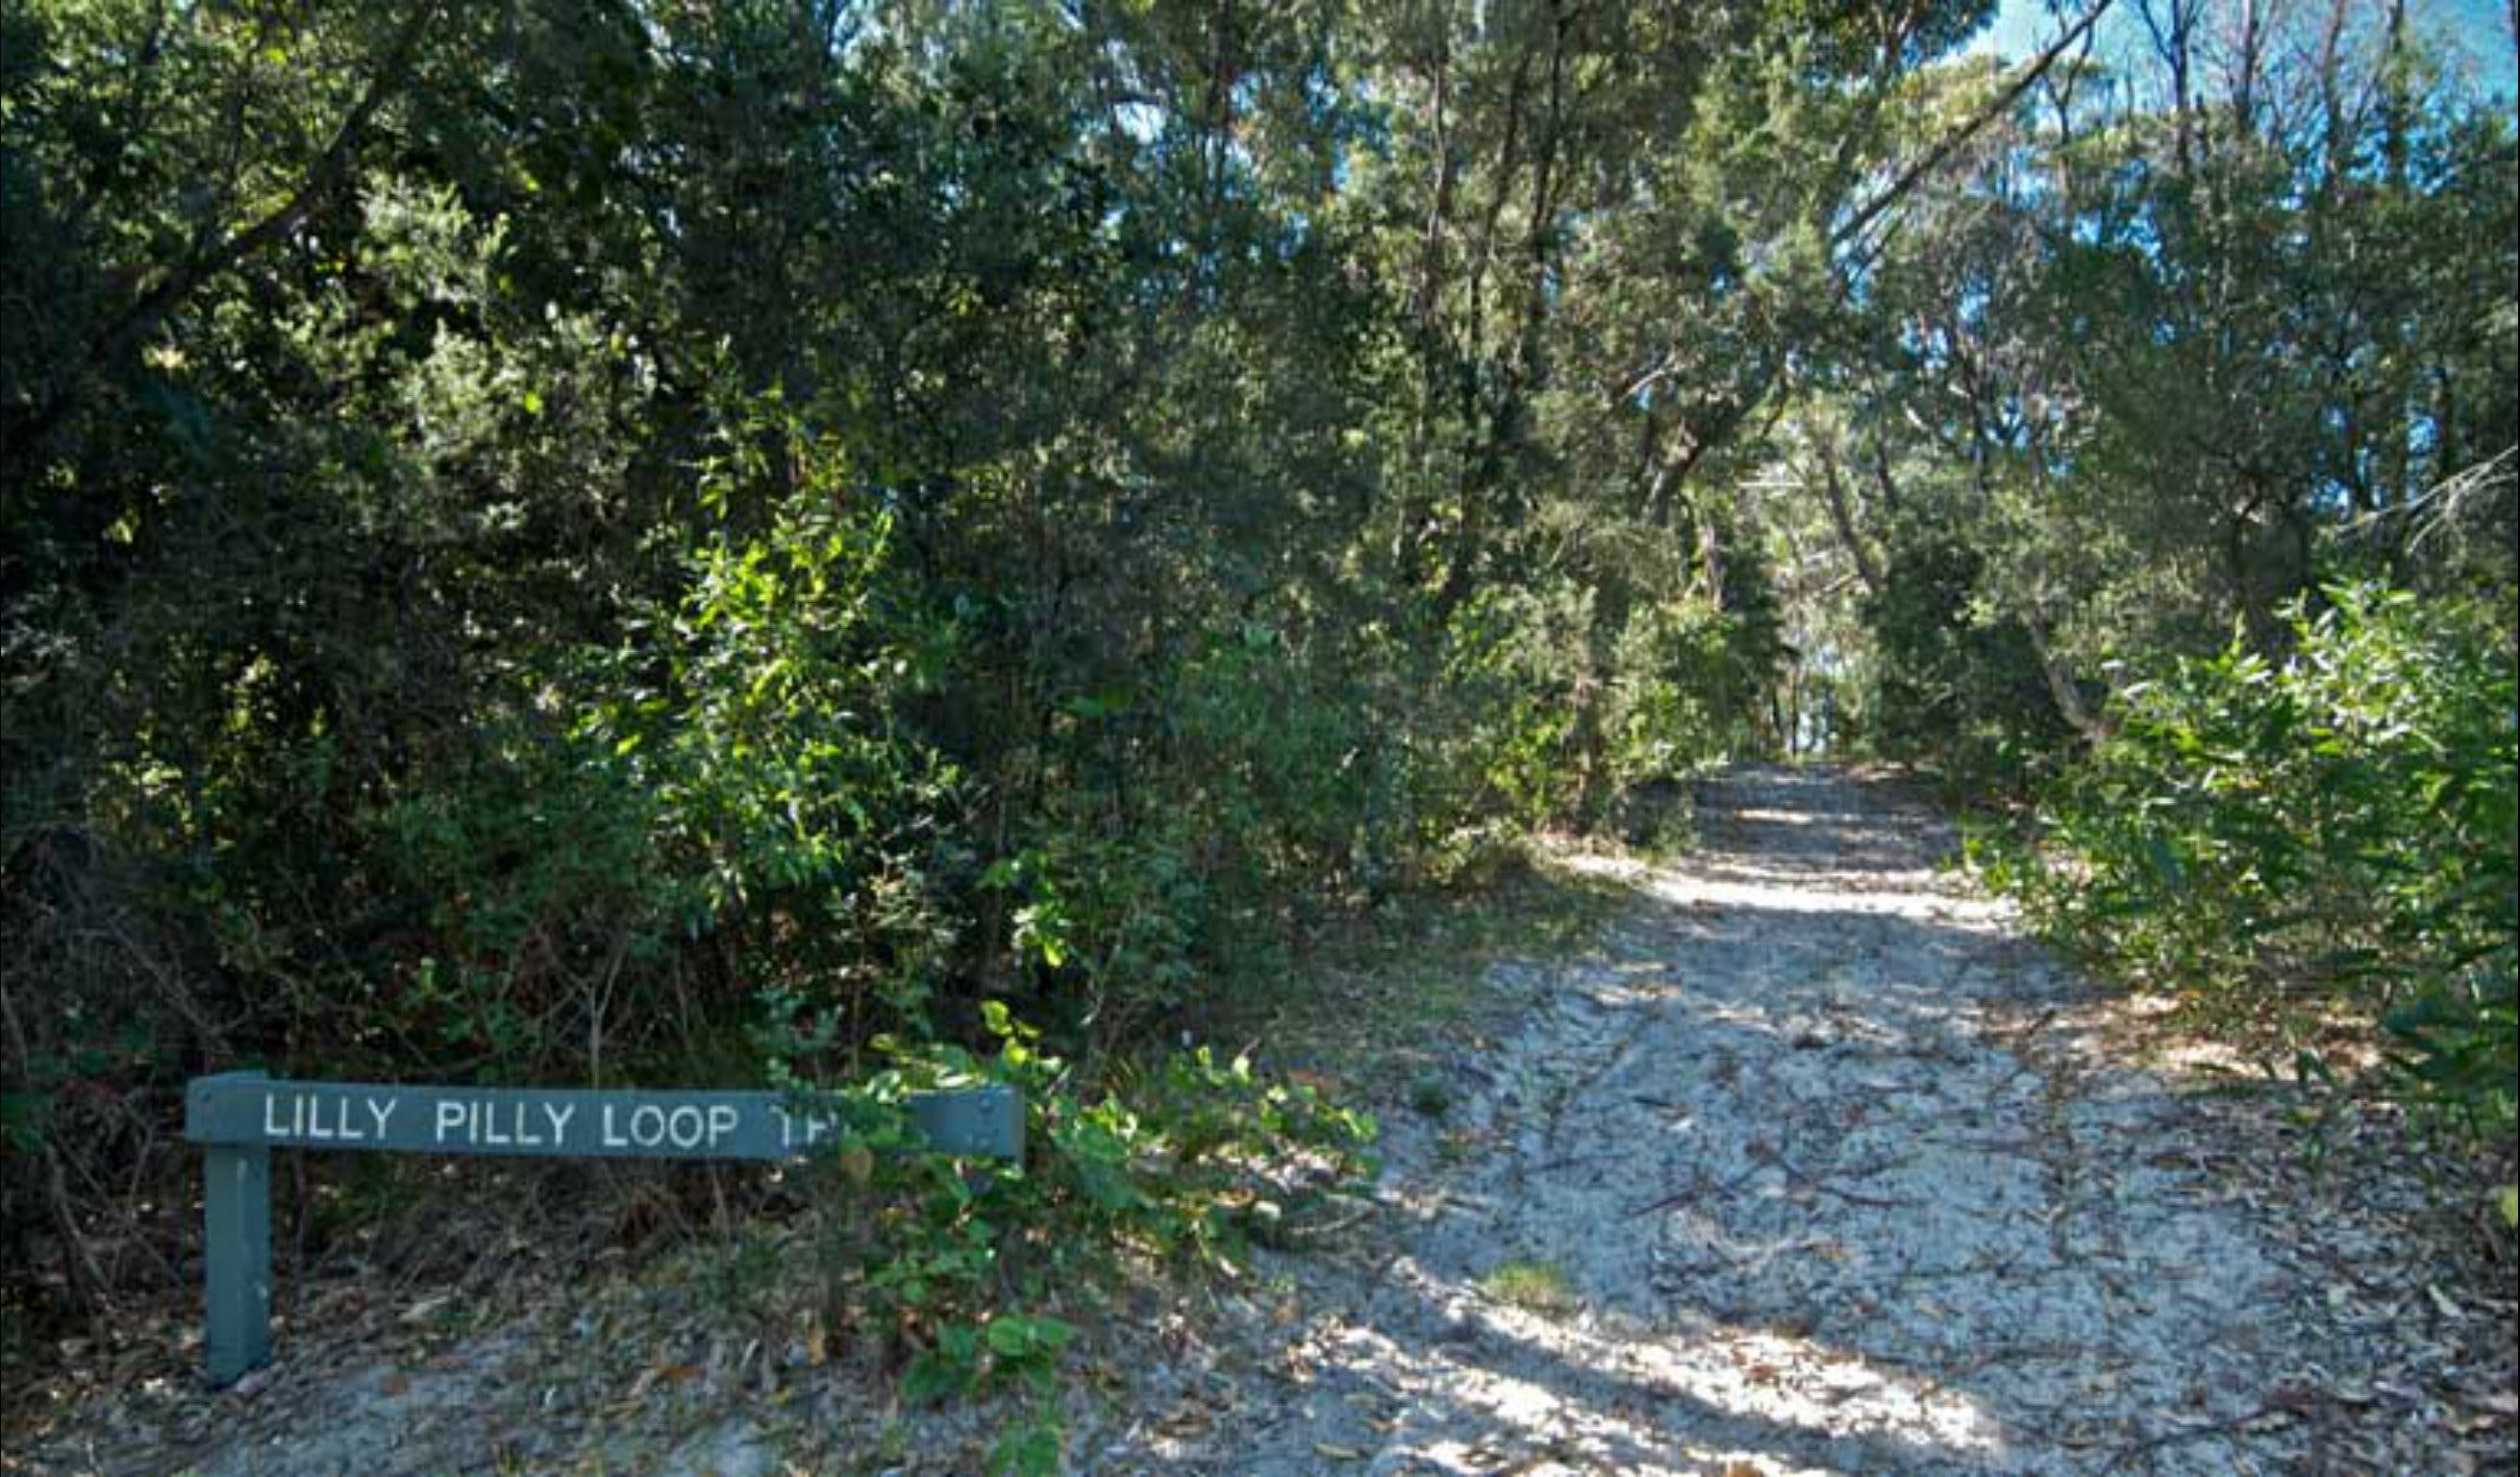 Lillypilly loop trail - Find Attractions